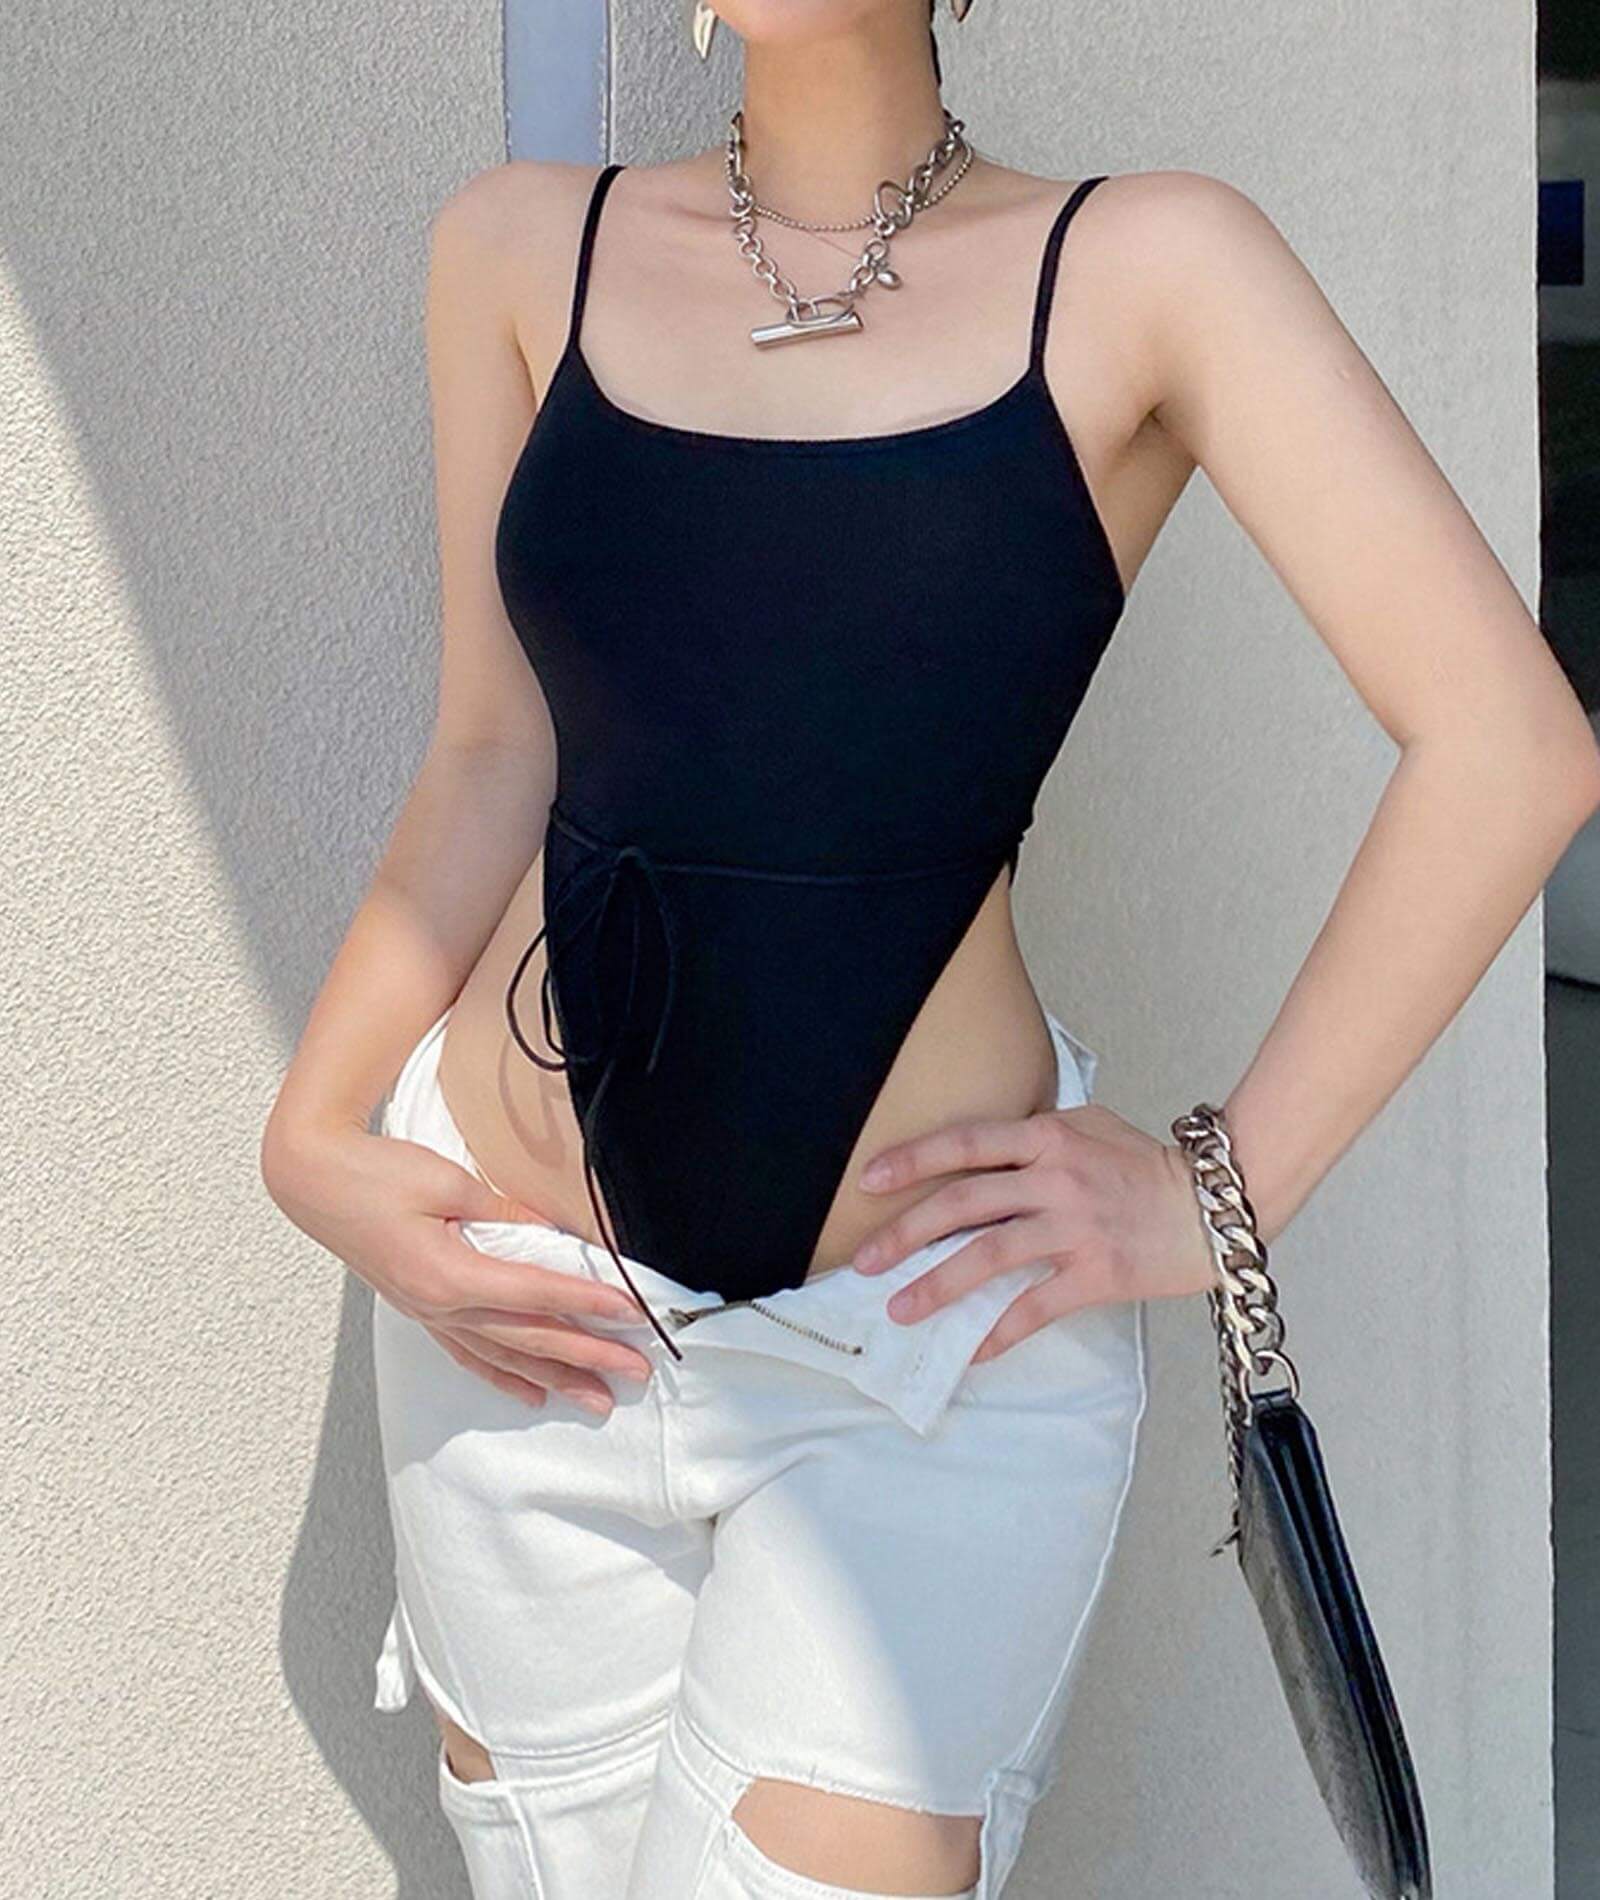  Women's Lace Up Bandage Bodysuit Sleeveless Spaghetti Straps Hollow Out Tie Knot Overalls Bodycon Camisole Shirt